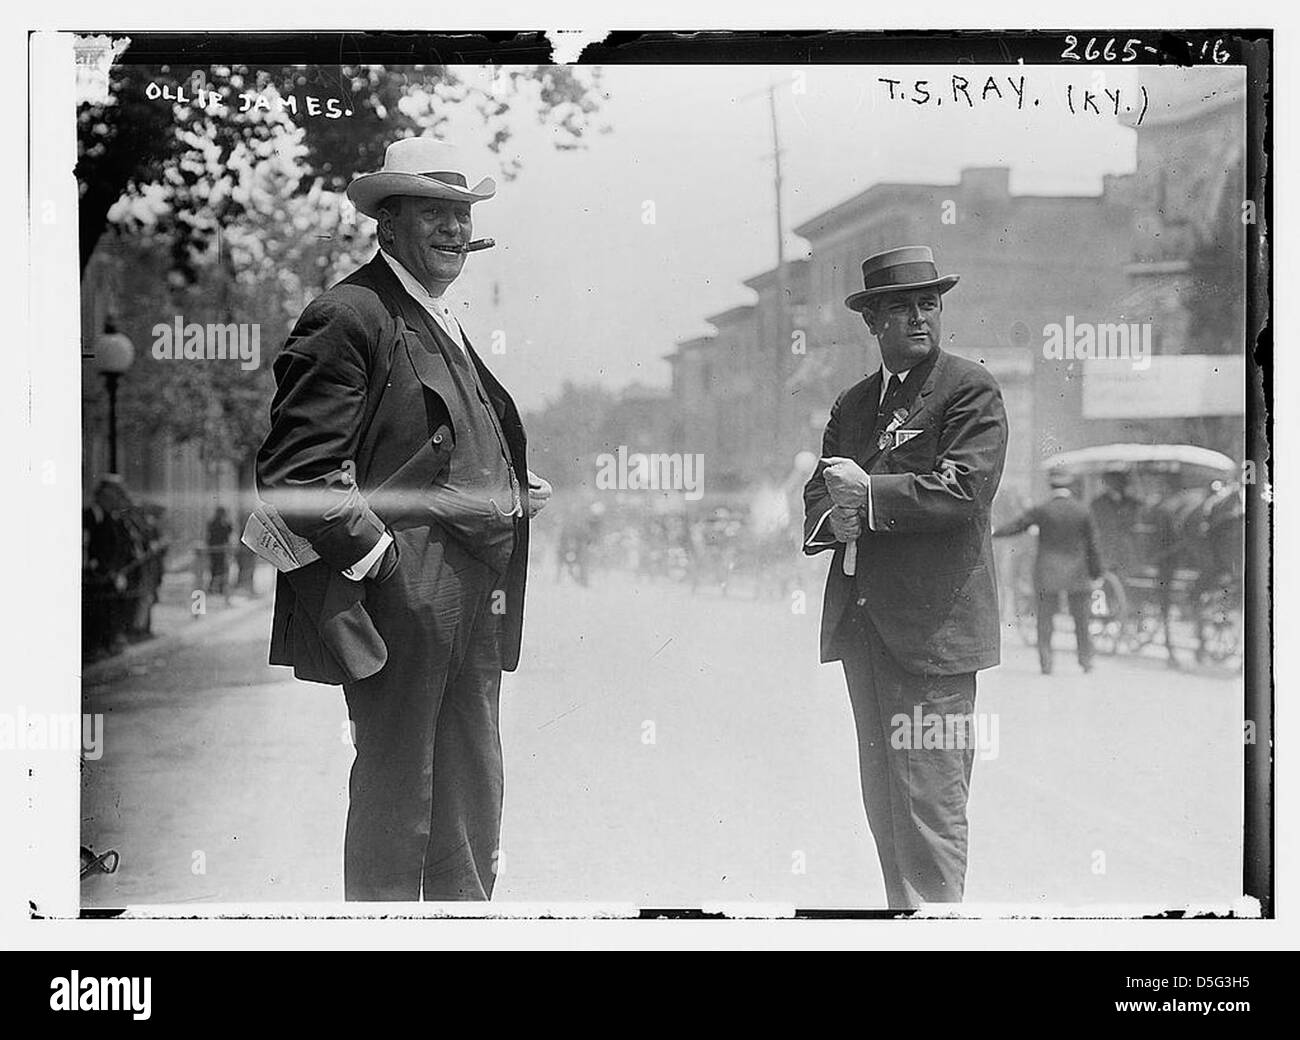 Ollie James, T.S. Ray (Ky.) (LOC) Foto Stock